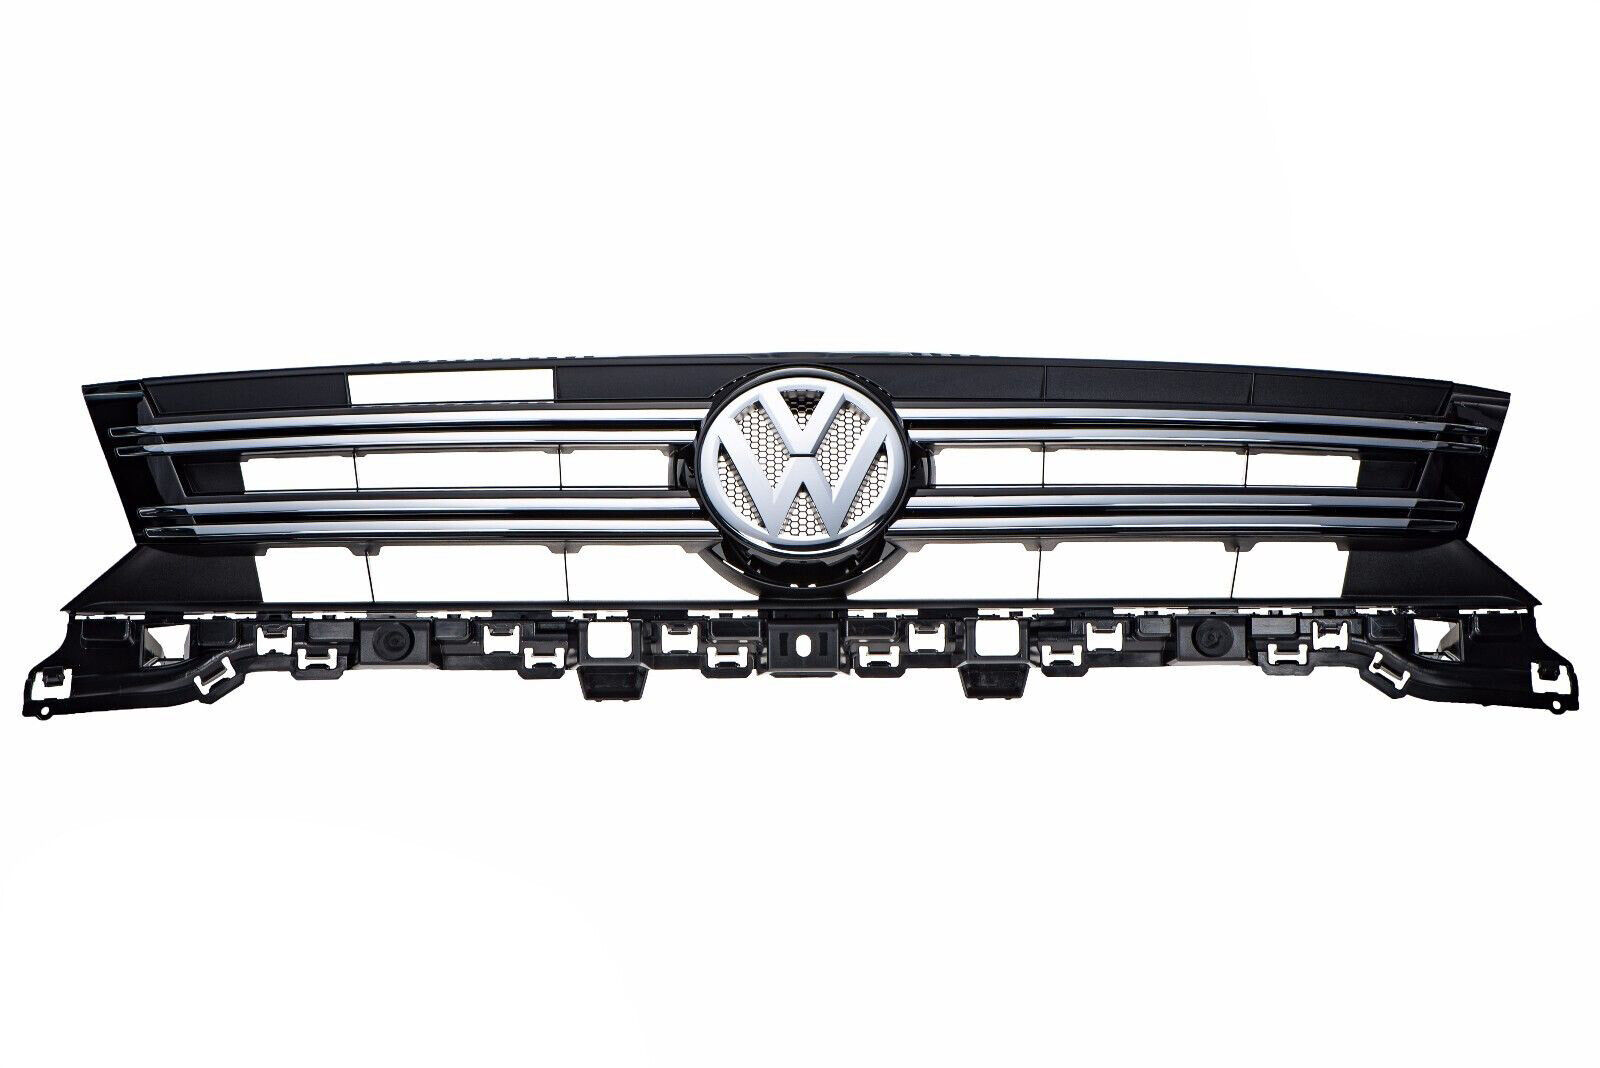 12-17 VW Volkswagen Tiguan Satin Black With Chrome Front Radiator Grille Grill